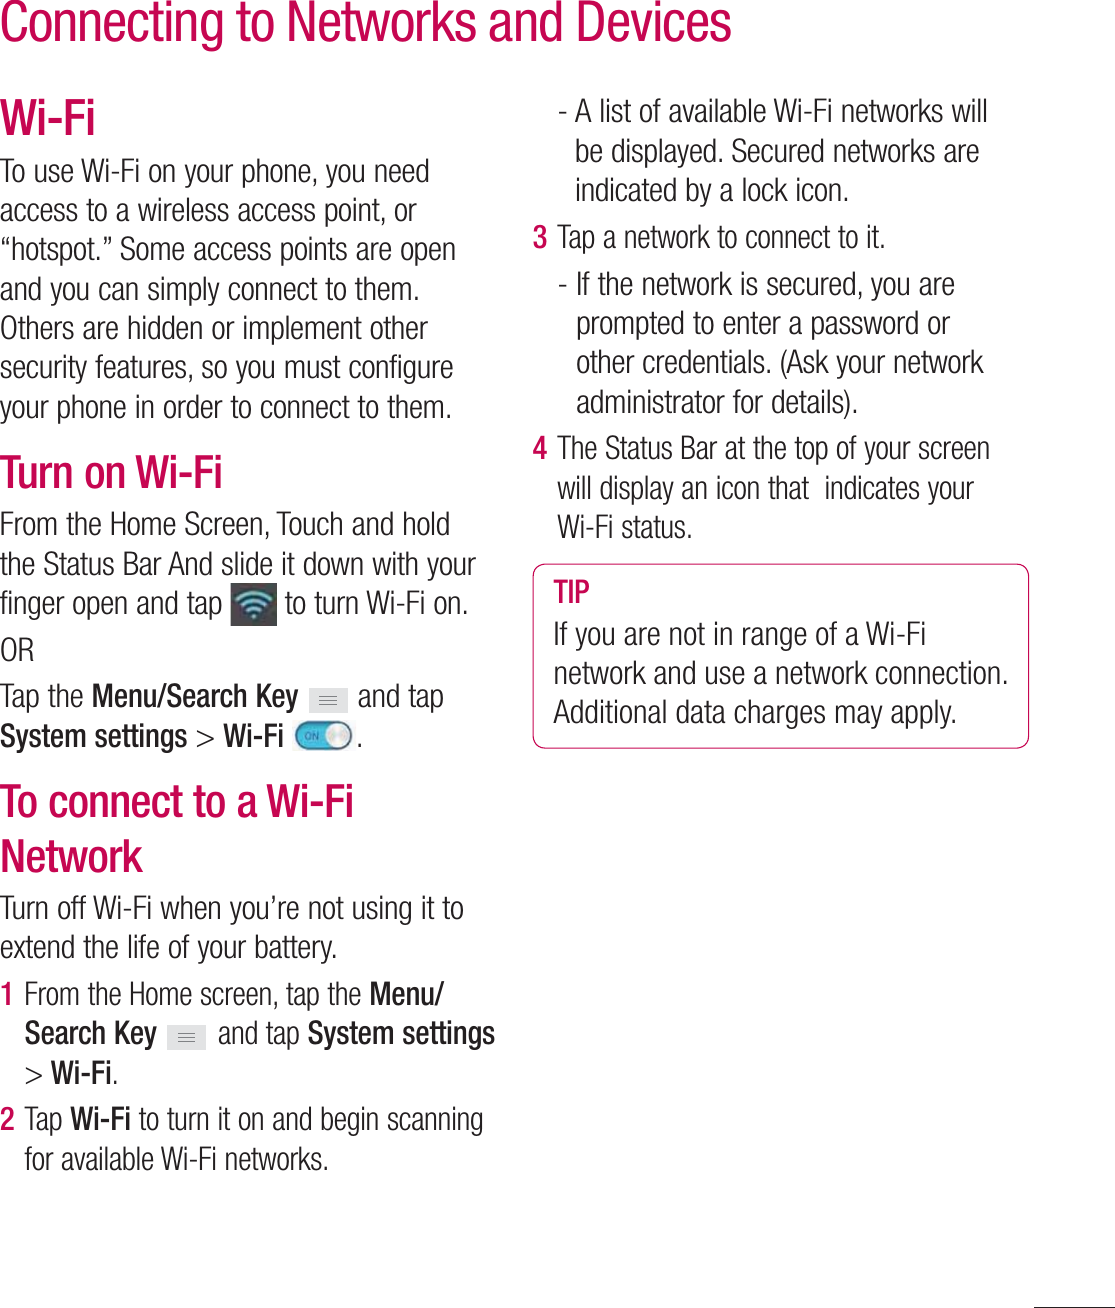 51Wi-FiTo use Wi-Fi on your phone, you need access to a wireless access point, or “hotspot.” Some access points are open and you can simply connect to them. Others are hidden or implement other security features, so you must configure your phone in order to connect to them.Turn on Wi-FiFrom the Home Screen, Touch and hold the Status Bar And slide it down with your finger open and tap   to turn Wi-Fi on. ORTap the Menu/Search Key  and tap System settings &gt; Wi-Fi  .To connect to a Wi-Fi NetworkTurn off Wi-Fi when you’re not using it to extend the life of your battery.1  From the Home screen, tap the Menu/Search Key   and tap System settings &gt; Wi-Fi.2  Tap Wi-Fi to turn it on and begin scanning for available Wi-Fi networks.-  A list of available Wi-Fi networks will be displayed. Secured networks are indicated by a lock icon.3  Tap a network to connect to it.-  If the network is secured, you are prompted to enter a password or other credentials. (Ask your network administrator for details). 4  The Status Bar at the top of your screen will display an icon that  indicates your Wi-Fi status. TIPIf you are not in range of a Wi-Fi network and use a network connection. Additional data charges may apply.Connecting to Networks and Devices